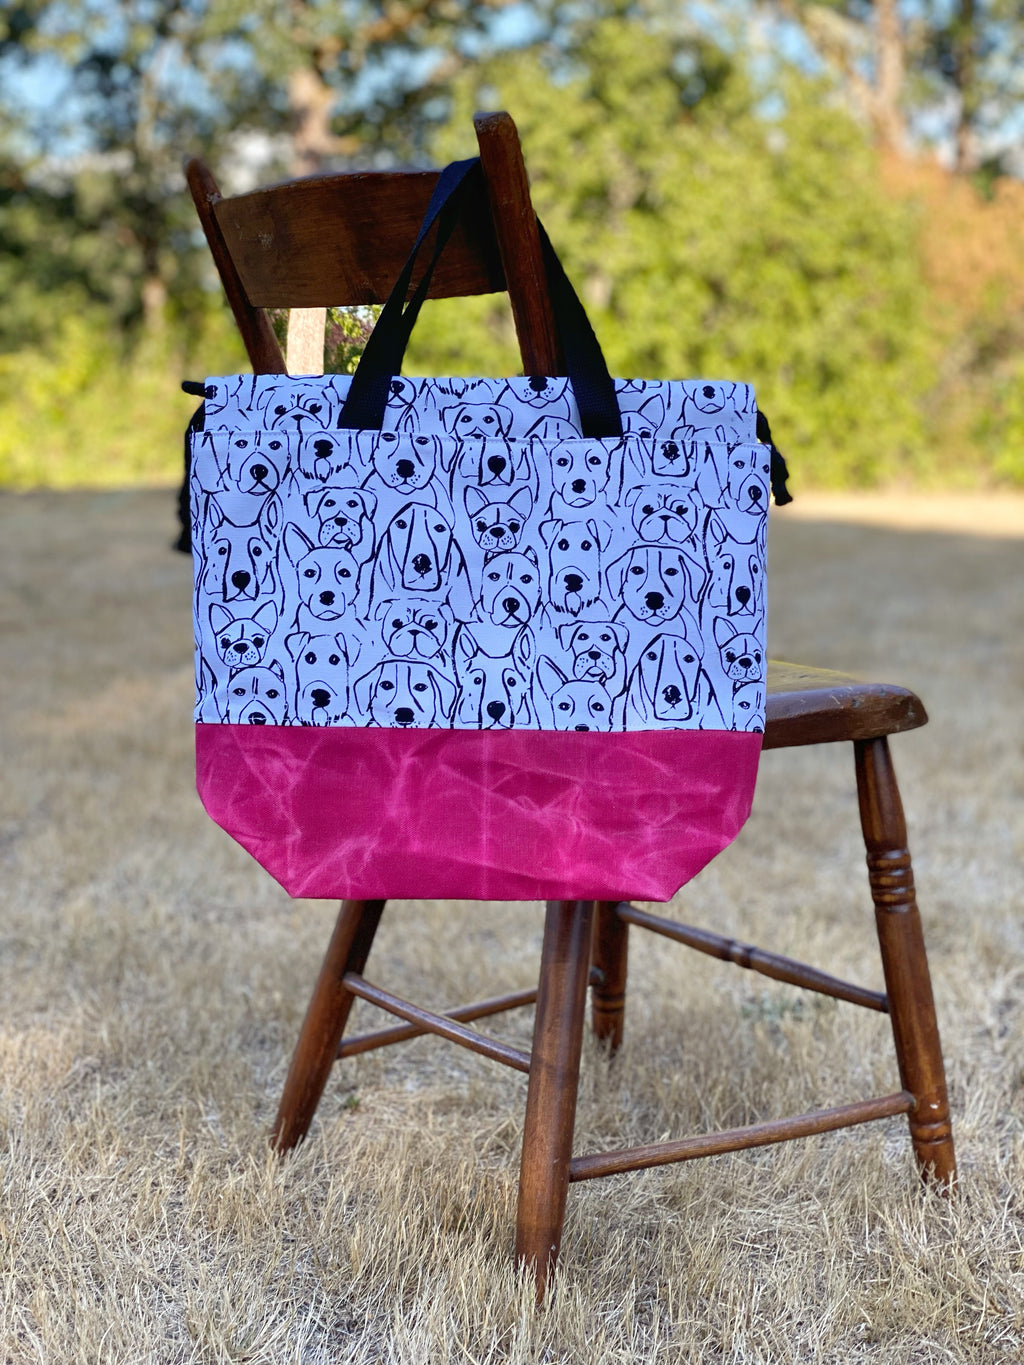 Black and White Dogs Canvas Project Bag, Project Bag for Knitters, Waxed Canvas Bag, Crochet Bag, Whimsical Project Bag